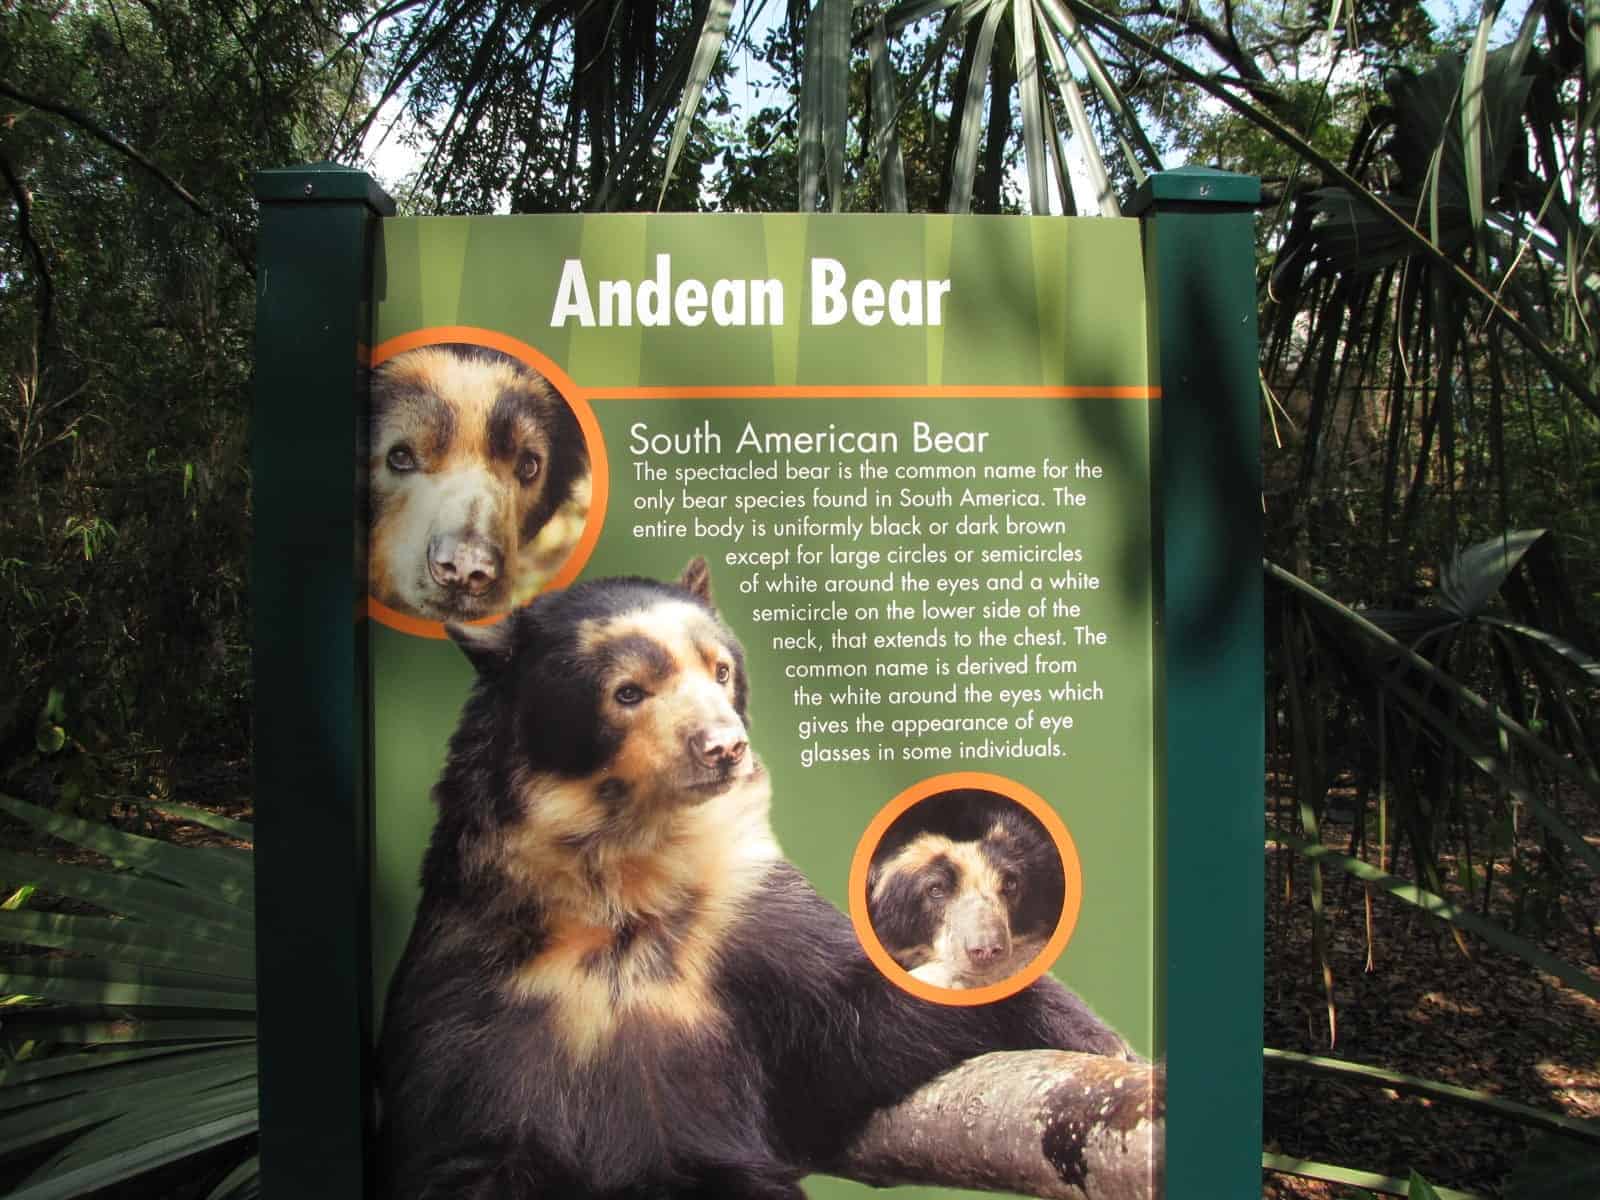 Andean Bear at Houston Zoo in Houston TX